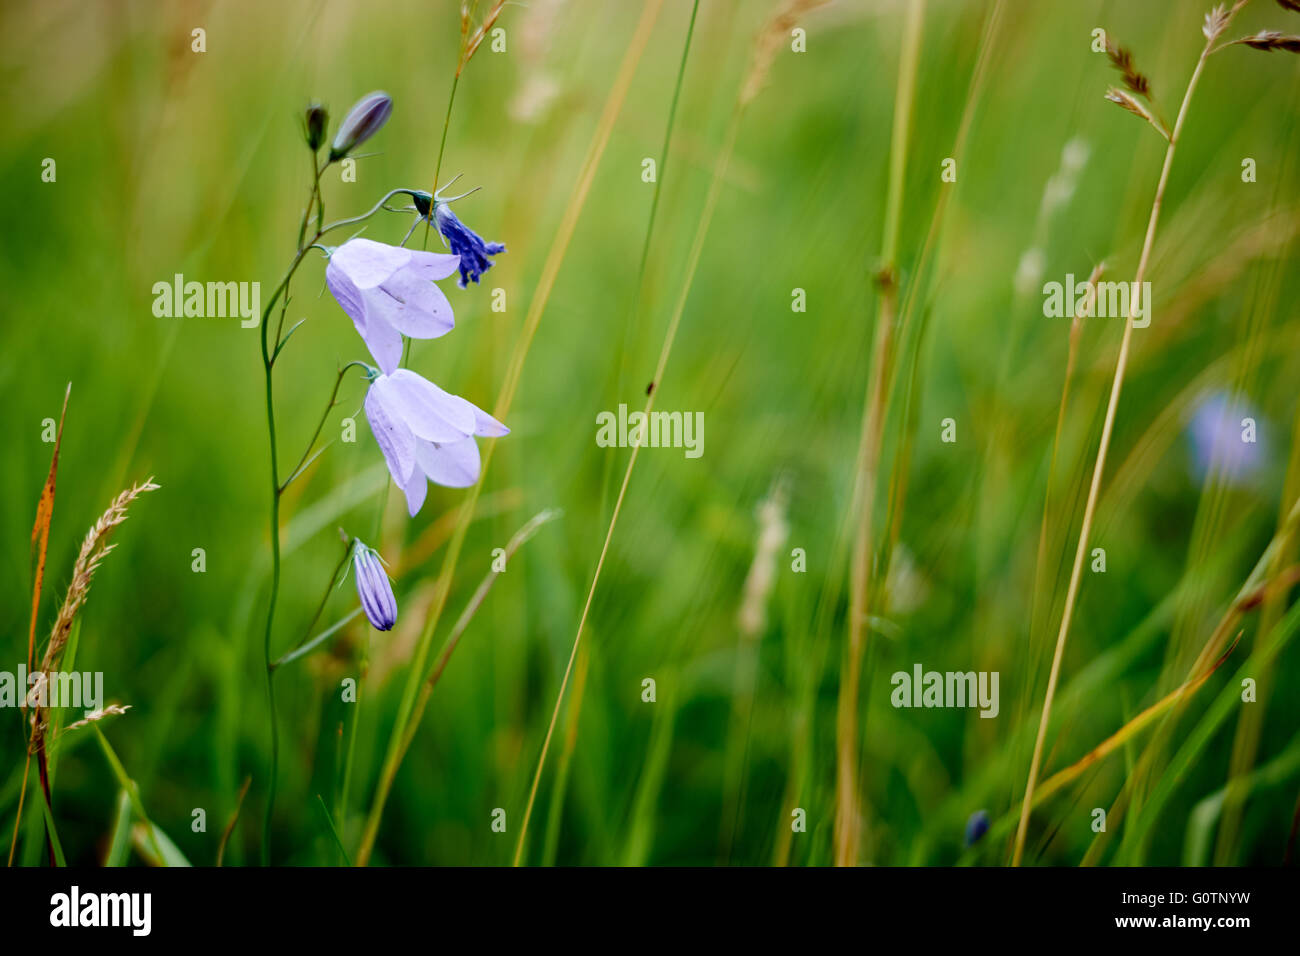 A Harebell, Campanula rotundifolia, flowering against a background of grasses in a meadow in North Yorkshire. UK. Stock Photo